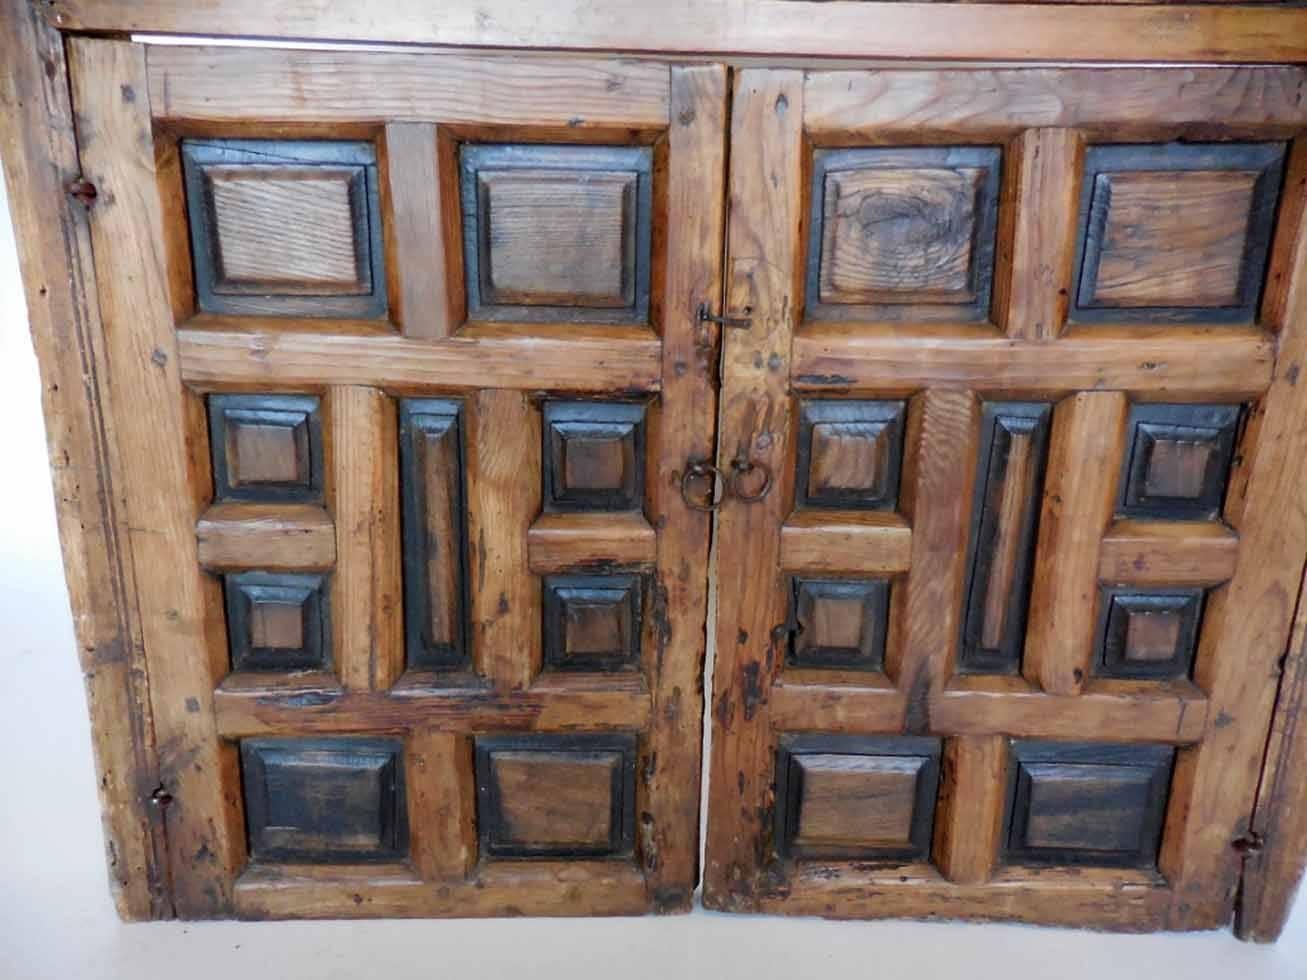 18th Century and Earlier 18th Century Wooden Window Shutters with Panels and Turned Wood